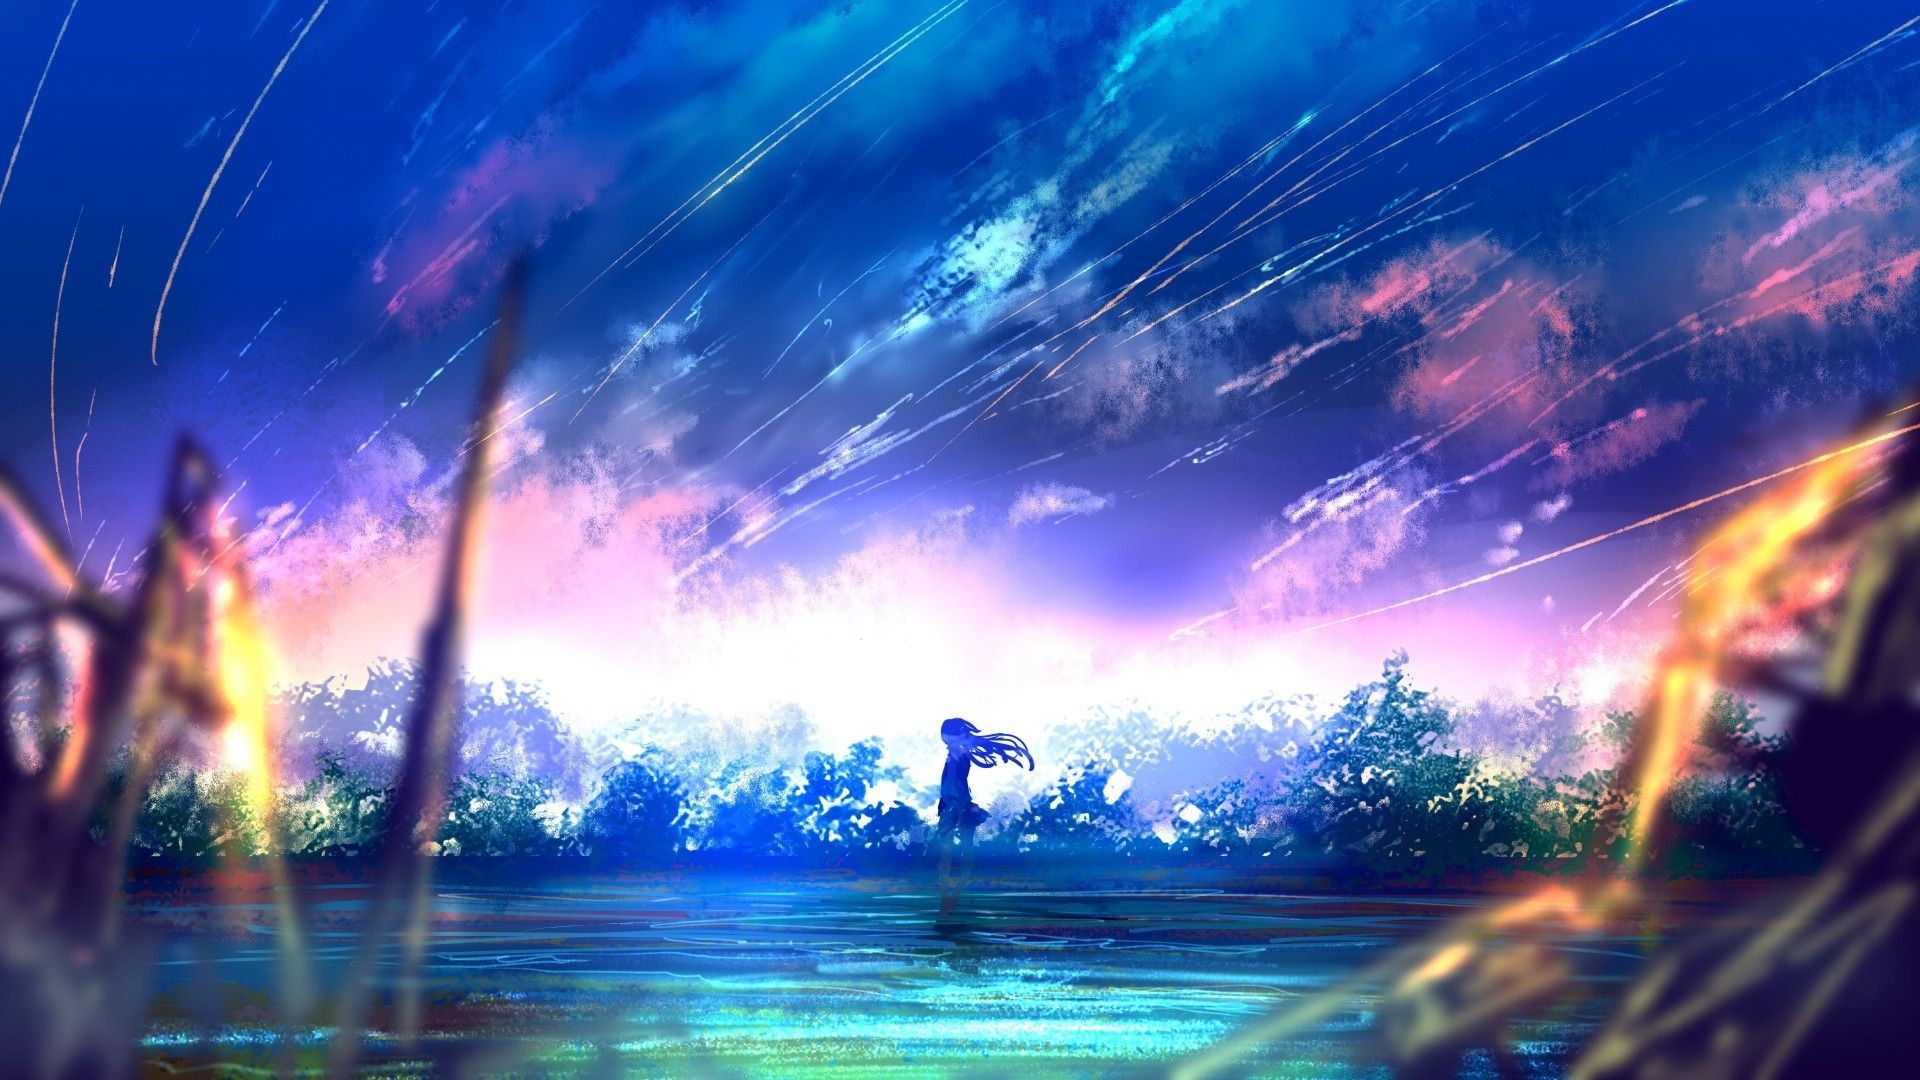 Colorful Anime Scenery Wallpaper Free Colorful Anime Scenery Background